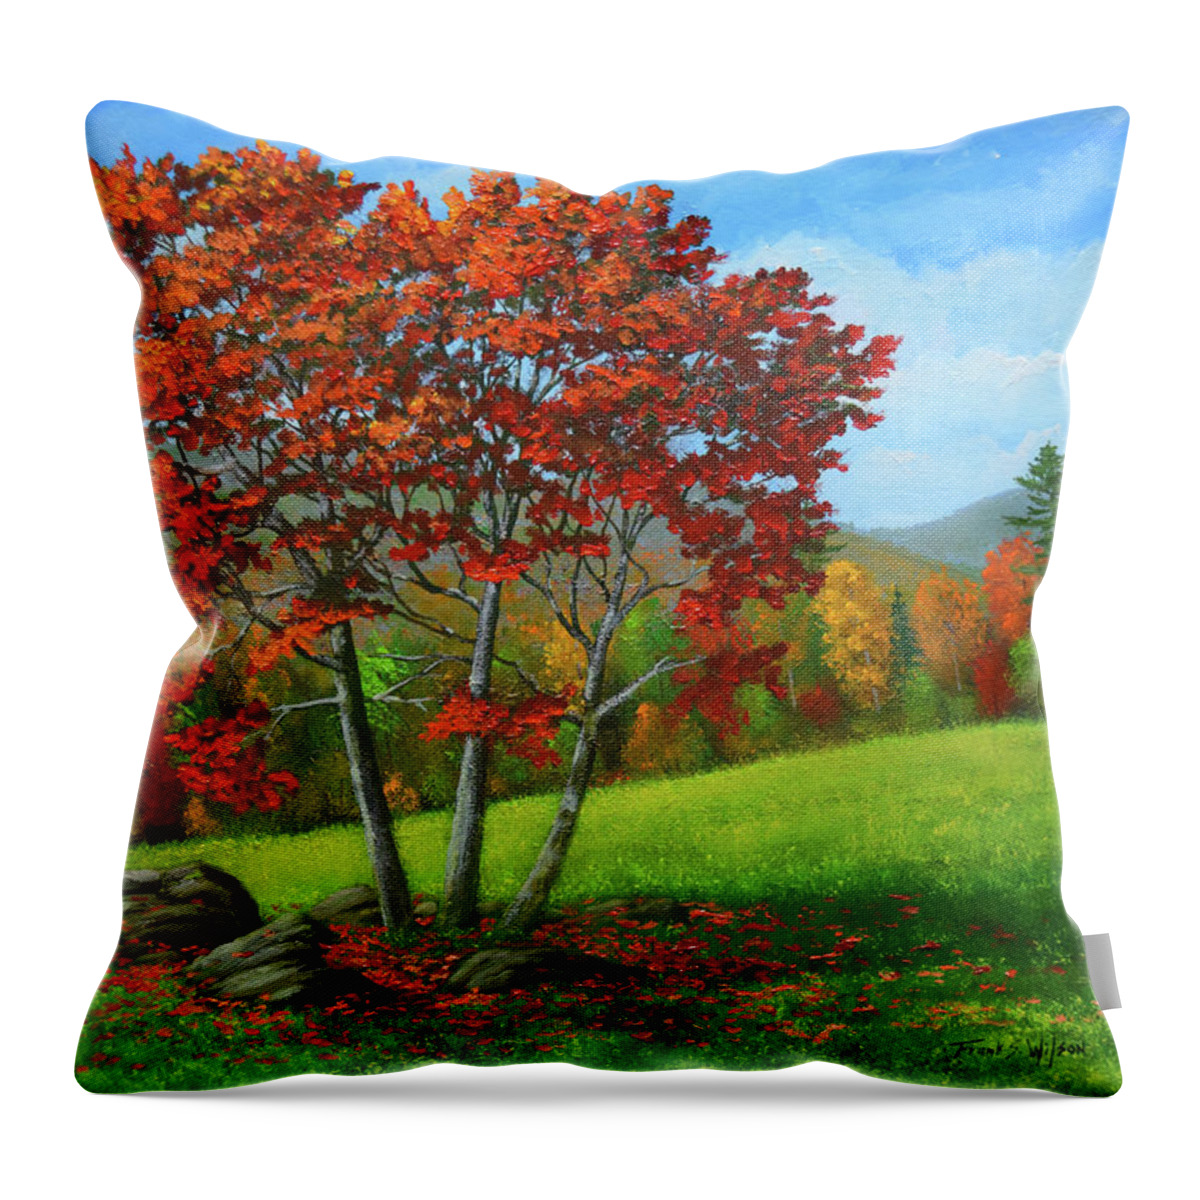 Green Mountain Autumn Throw Pillow featuring the painting As The Leaves Turn by Frank Wilson